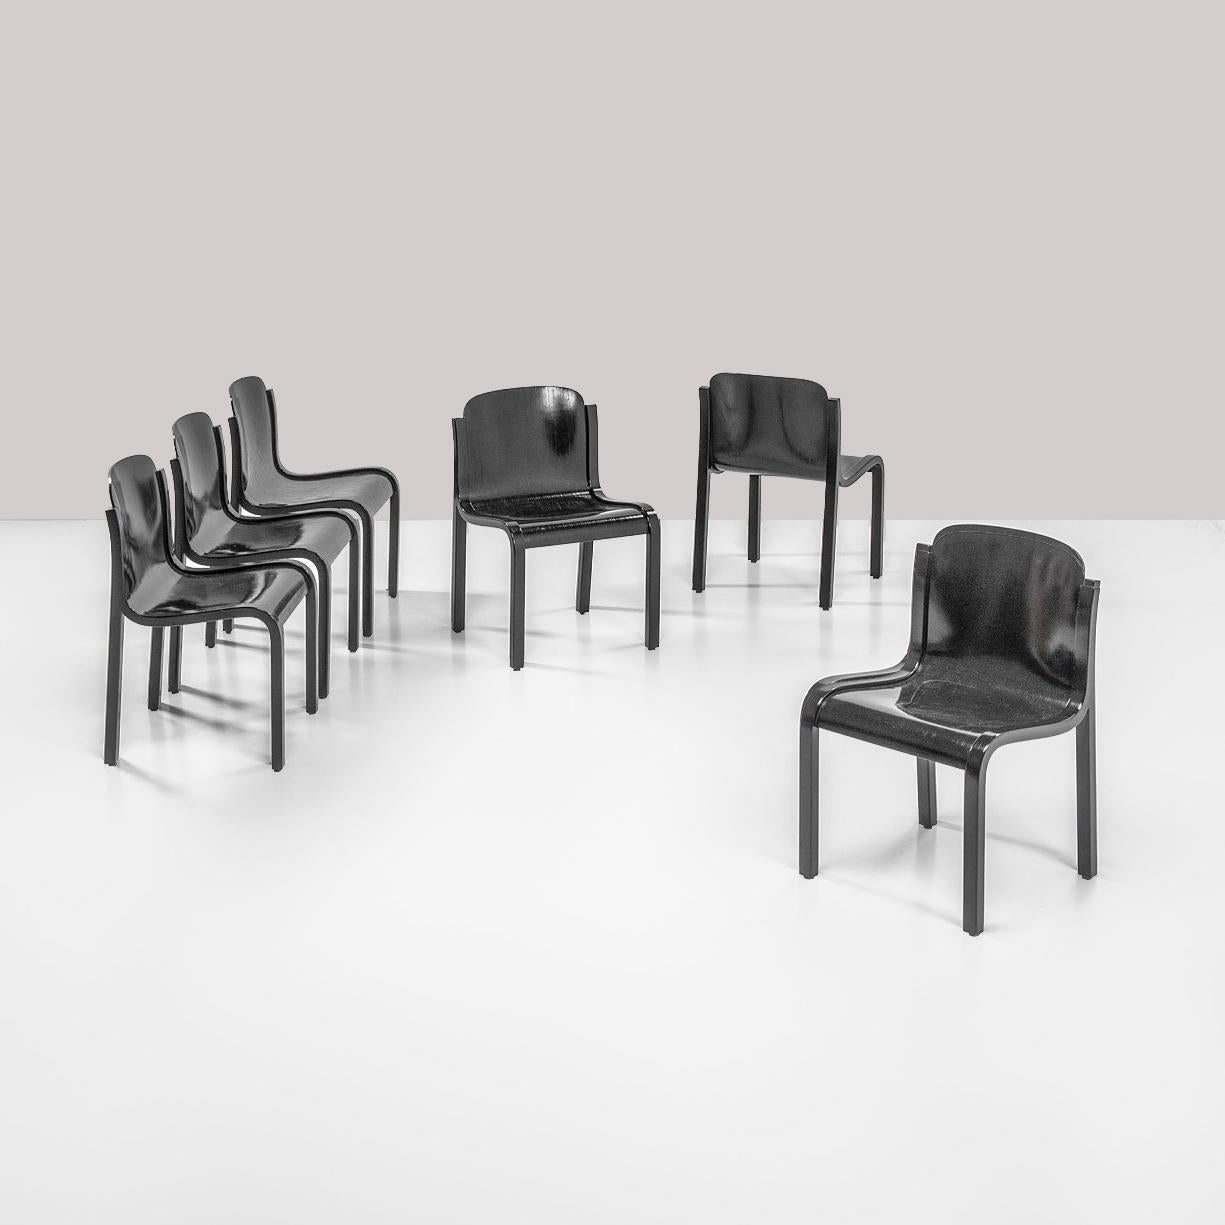 Carlo Bartoli

Mito

A beautiful set of six black lacquered ash wood chairs, the seat and back made of one s shaped bentwood piece.
Edited par Tisettanta, Giussano, Milano.
Italy, circa 1969.

Dimensions
Height : 75 cm
Width : 47 cm
Depth : 40